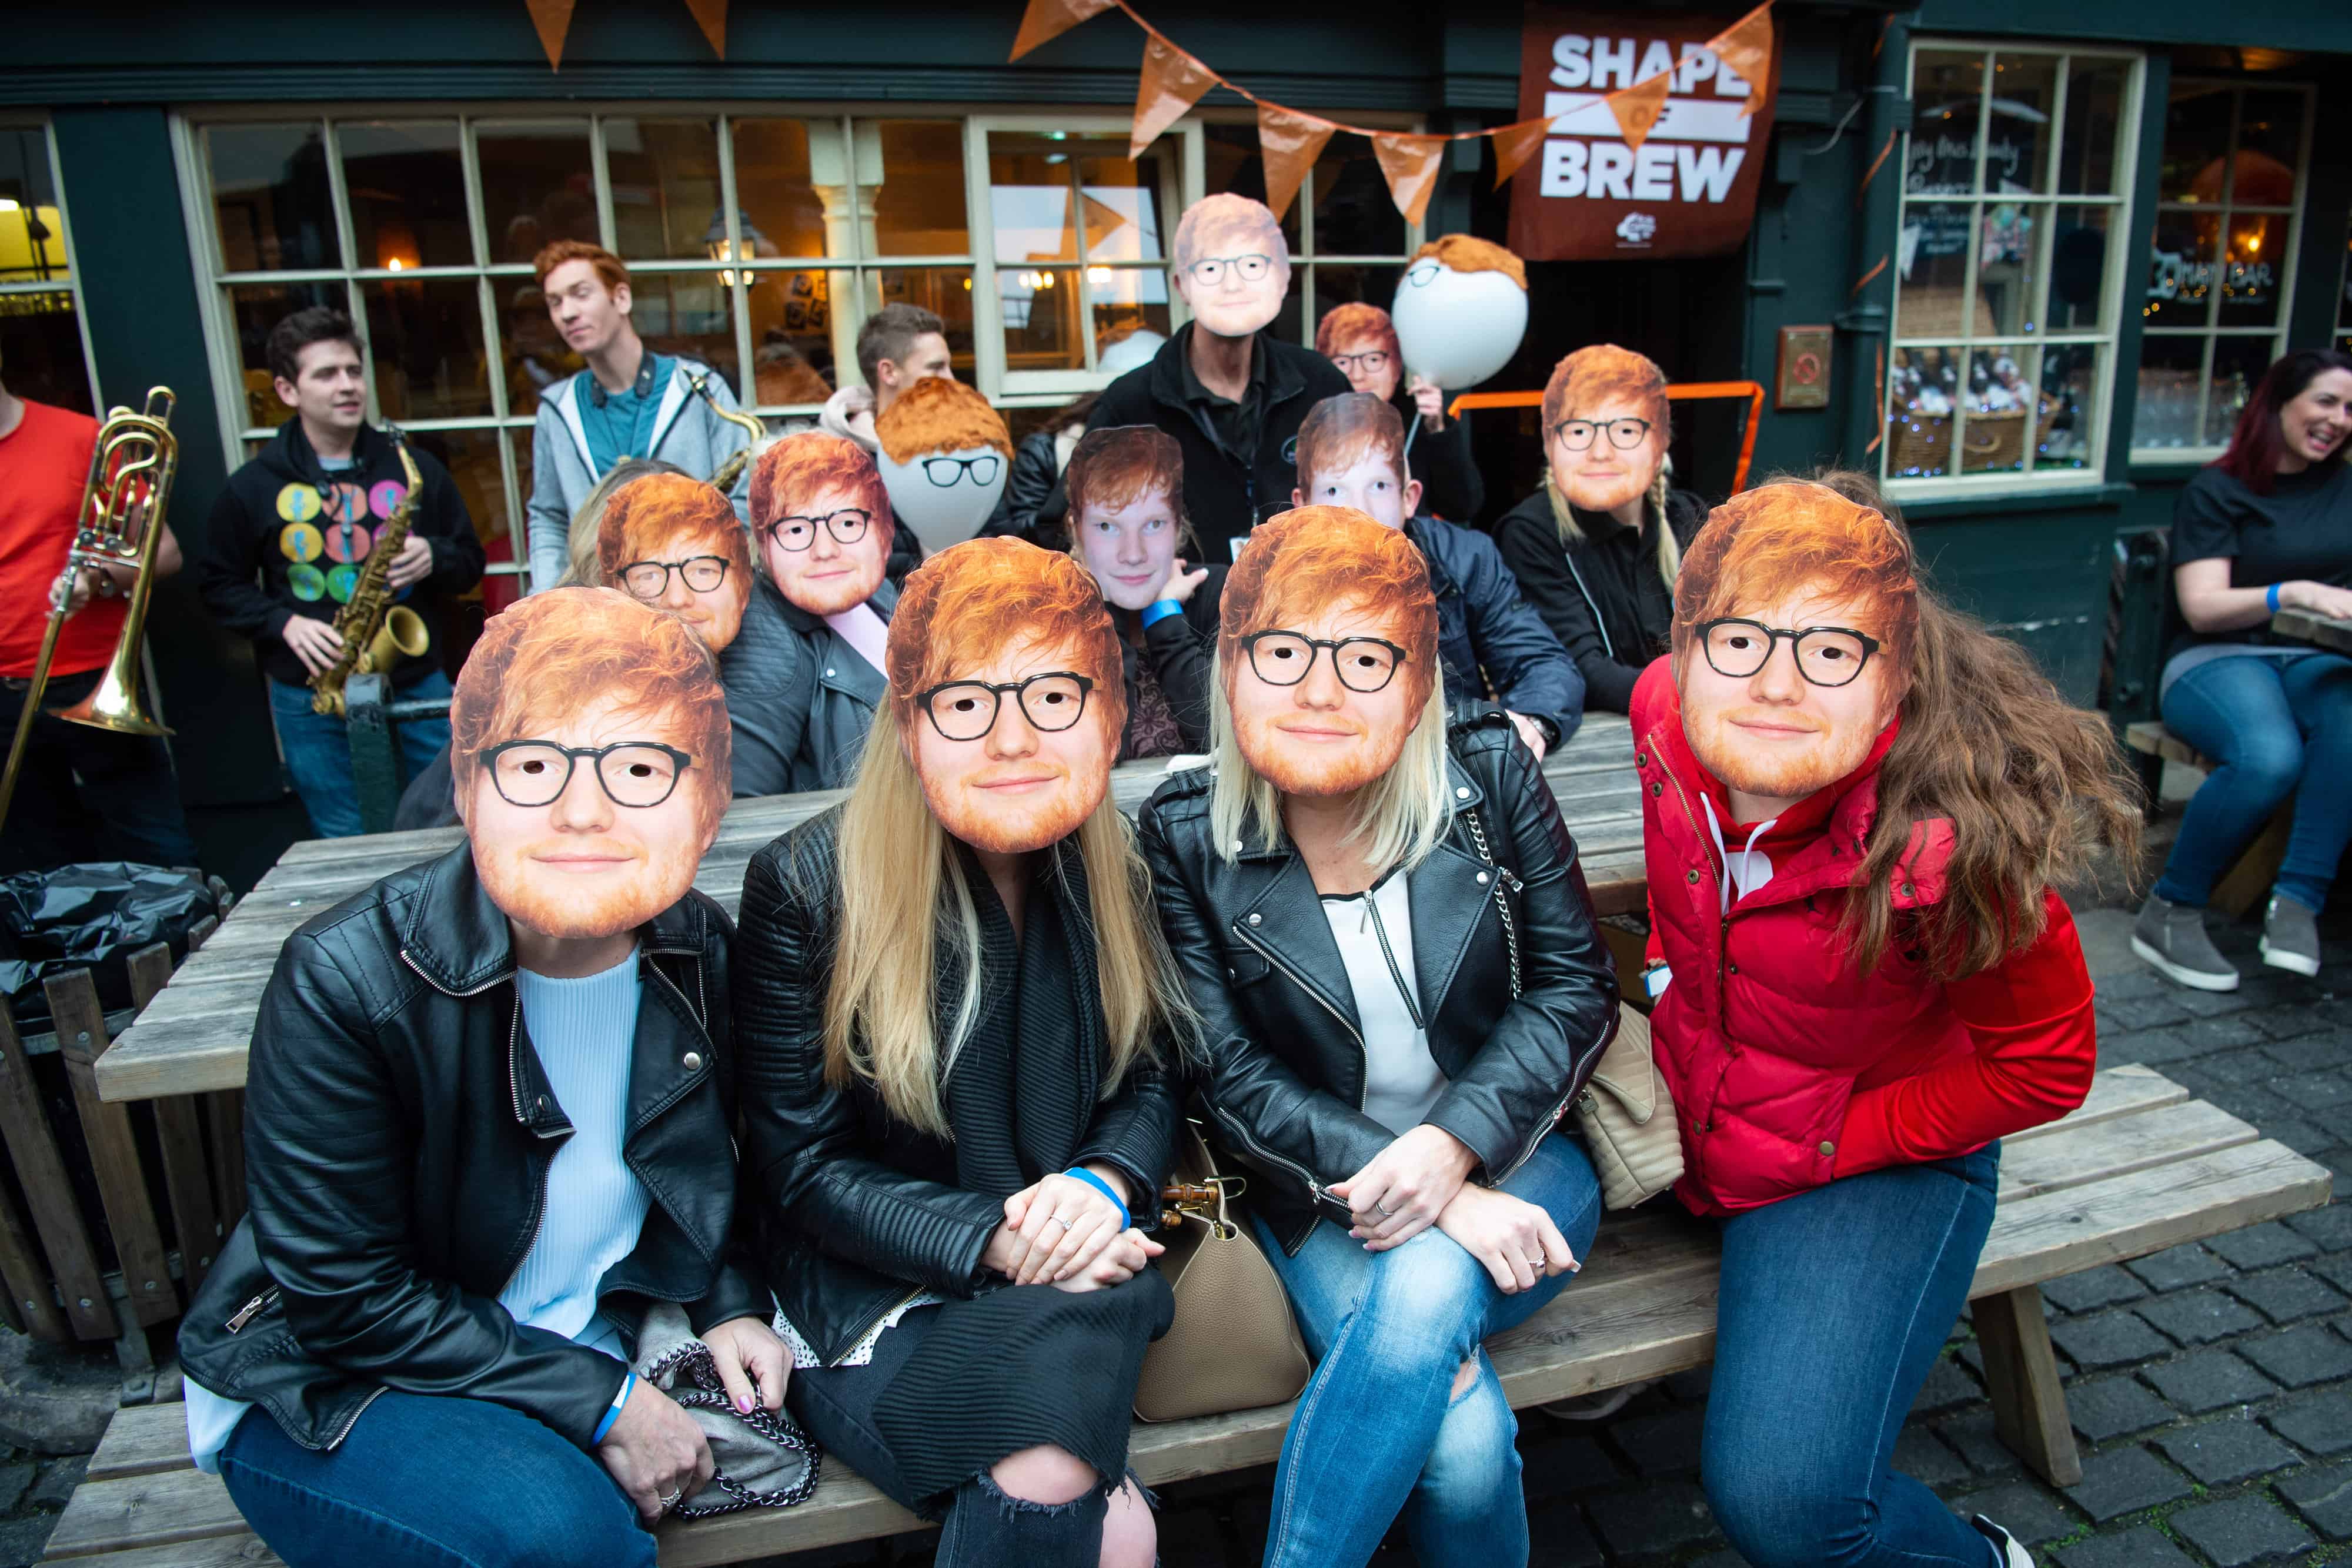 Ed Sheeran fans pictured in front of the Shape of Brew this morning (Image: Capital)